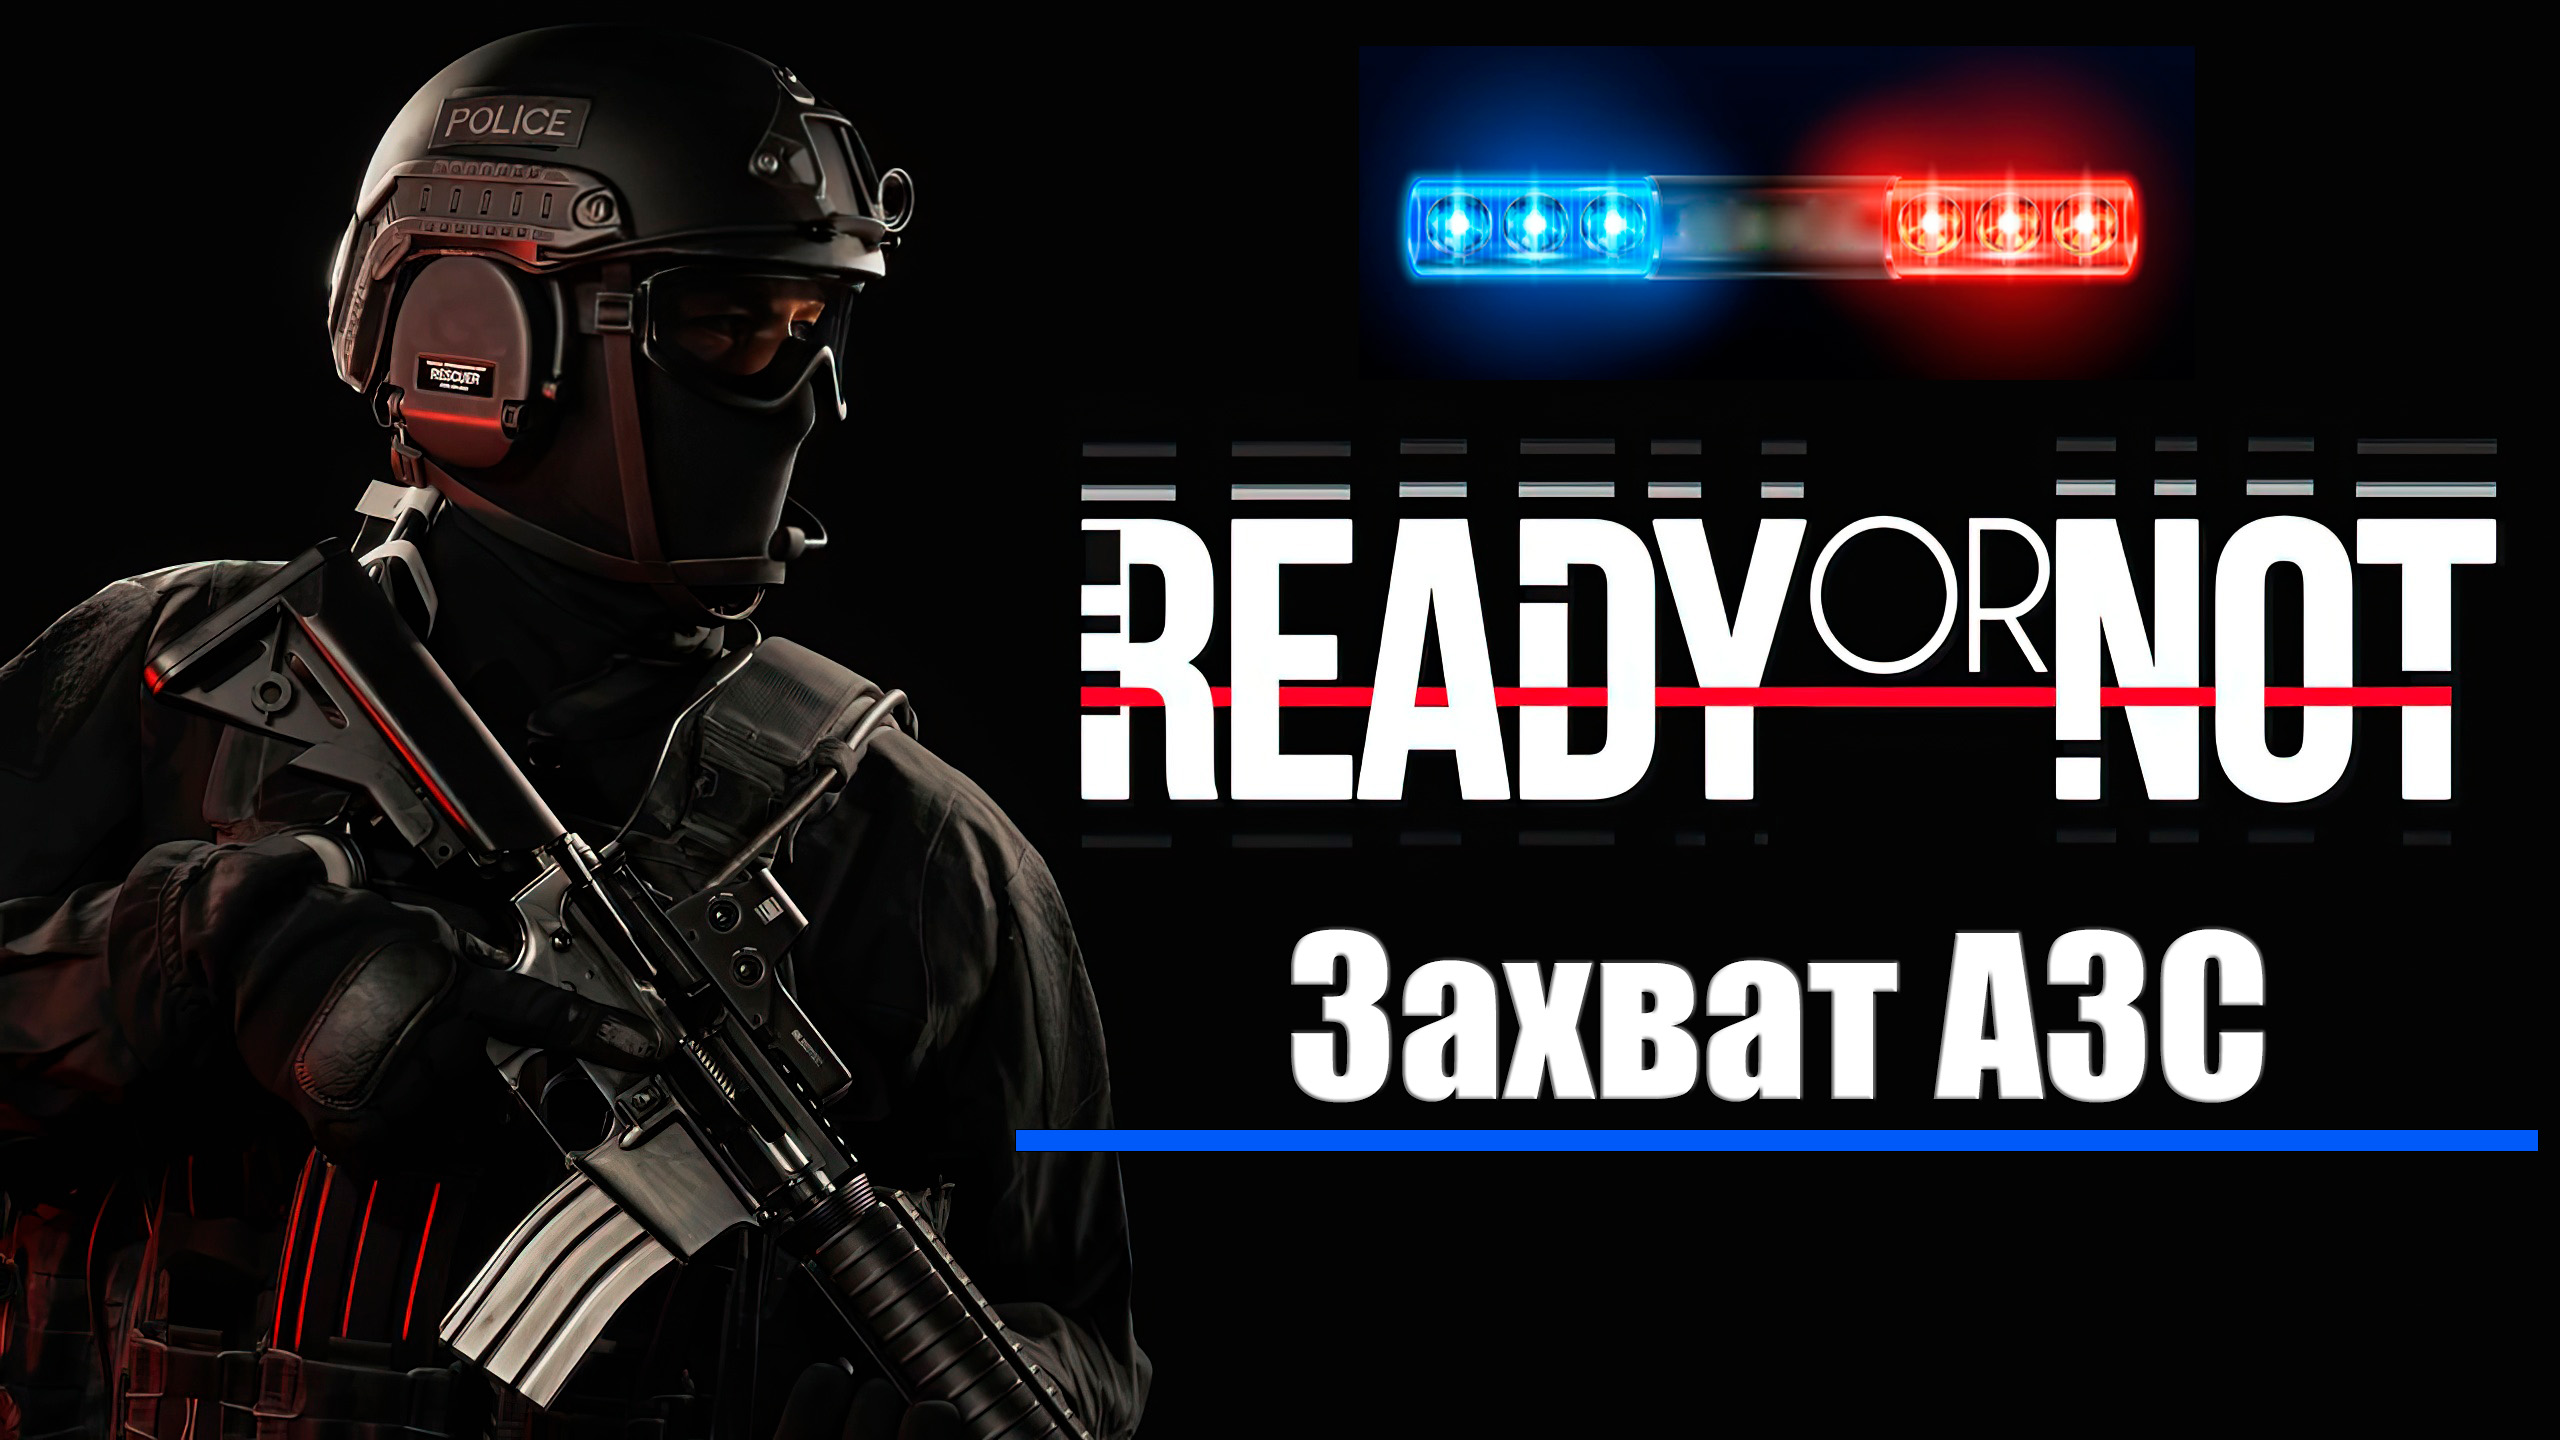 Ready or not игра. SWAT 4 АЗС. Ready or not карты. Обои еа телефон Redi or not.